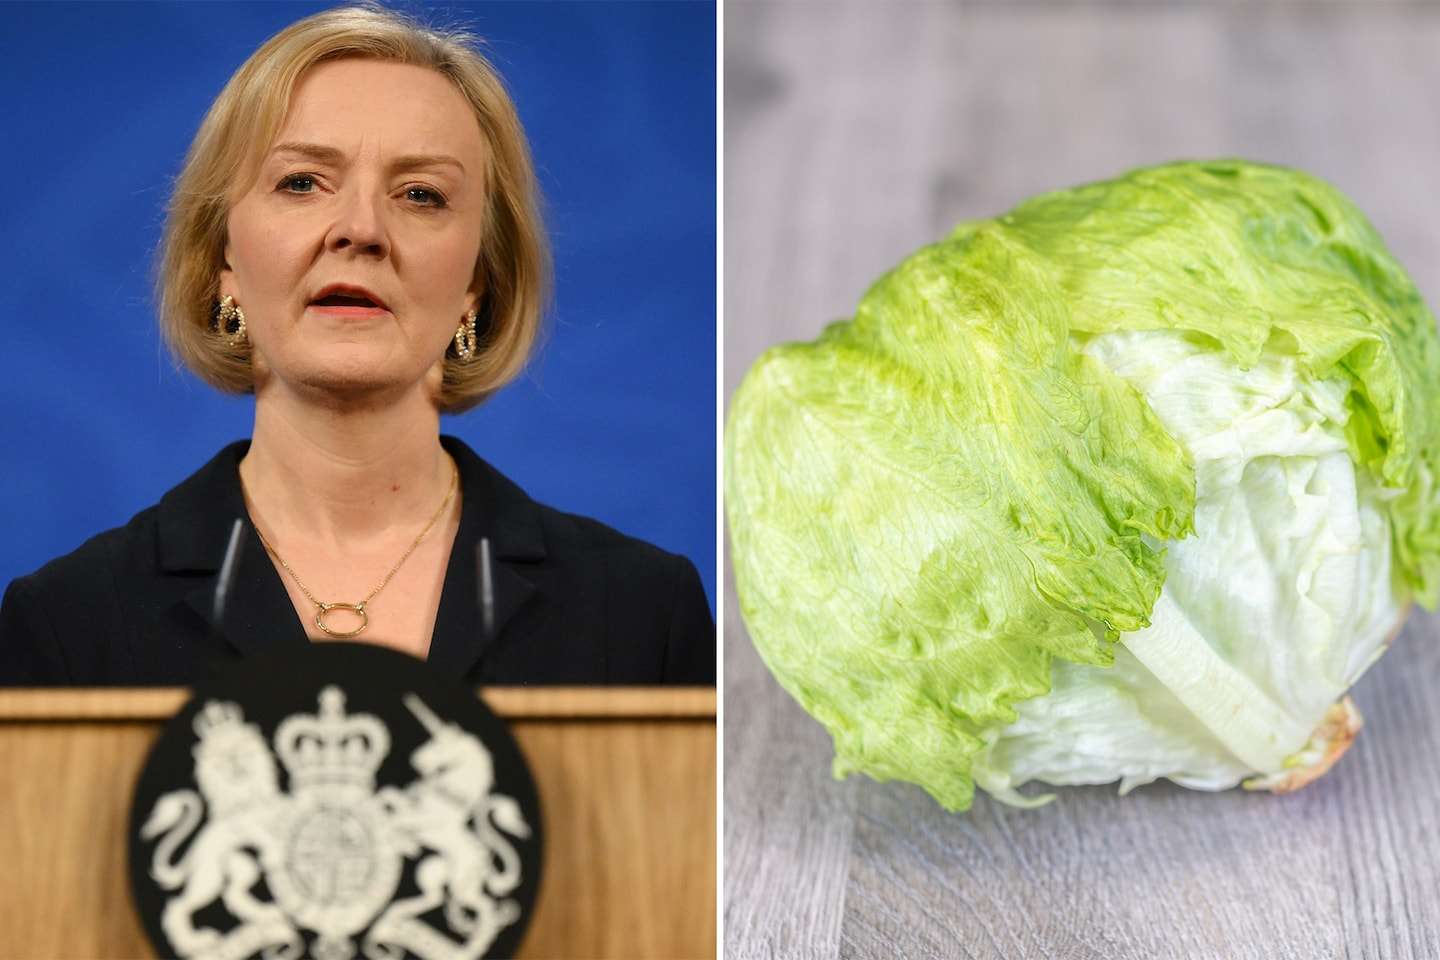 Why is Britain comparing its prime minister to a lettuce?